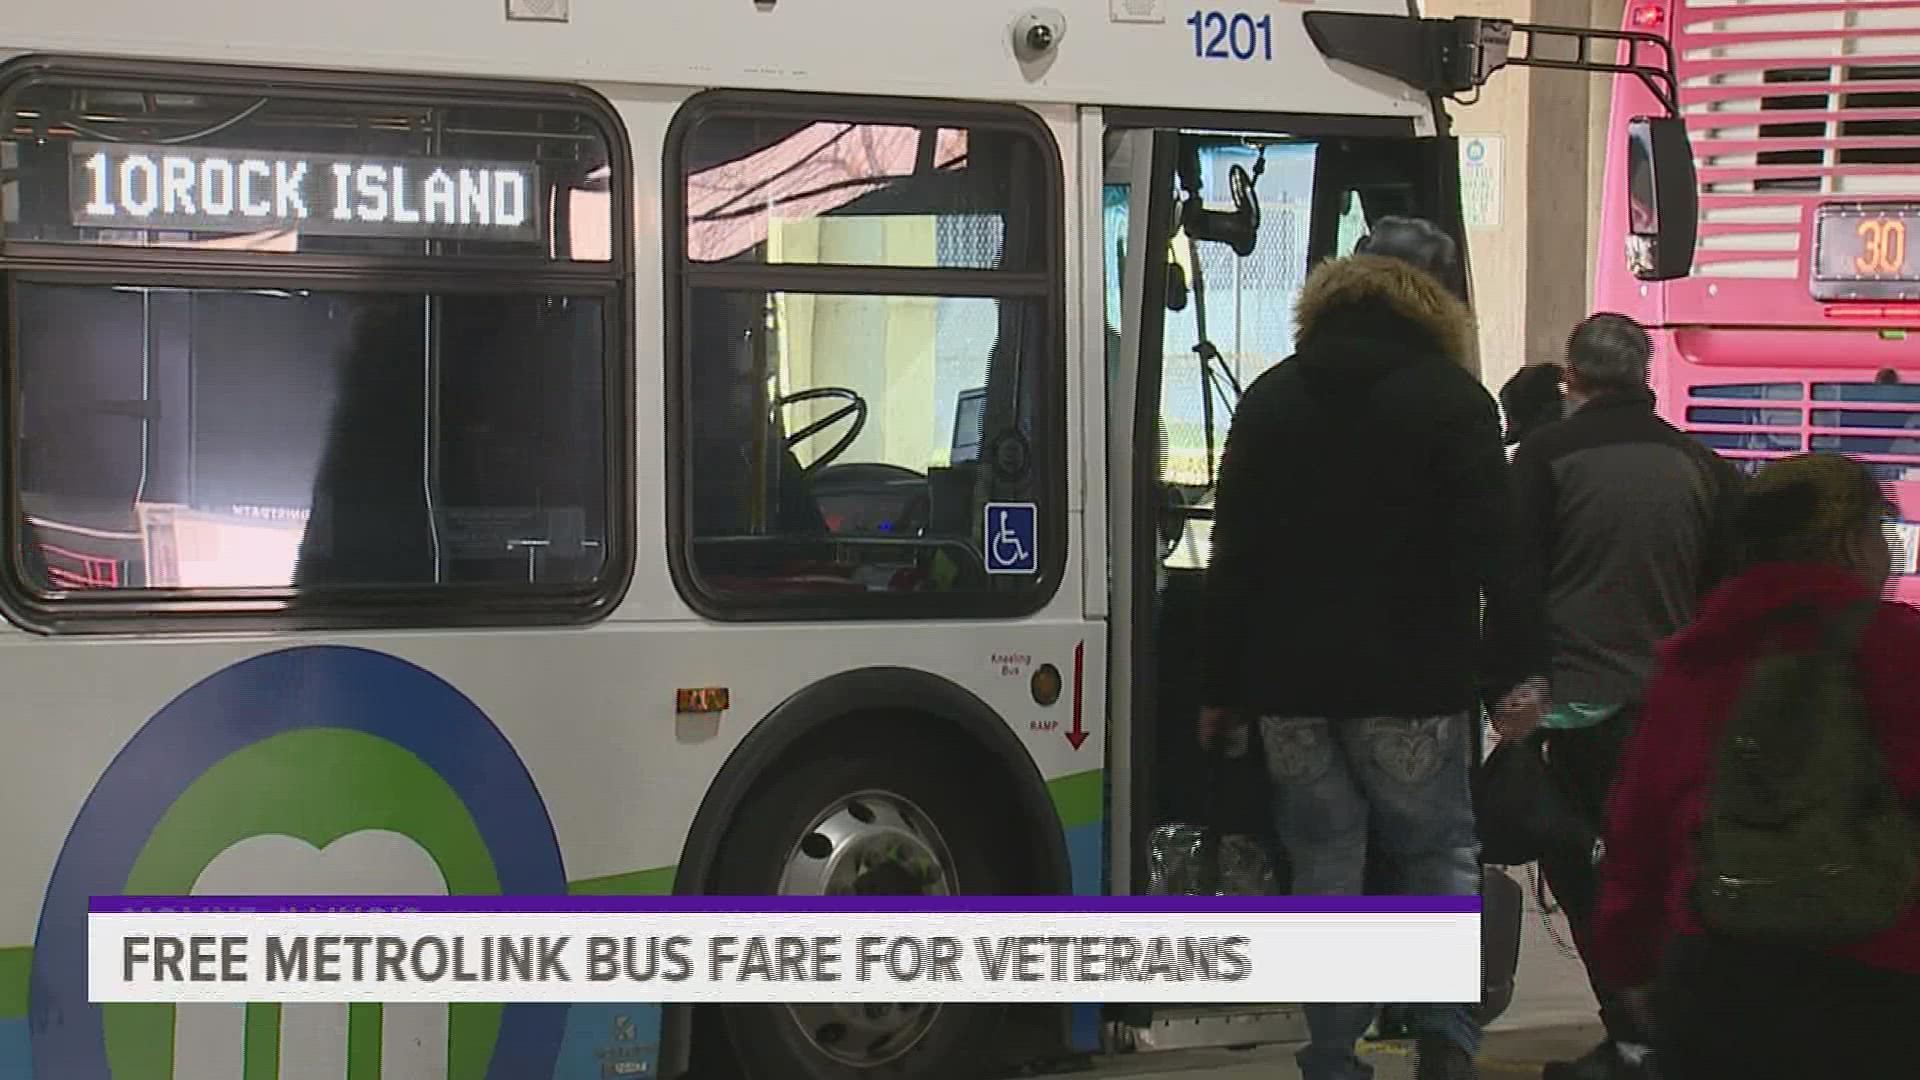 The new Veteran's Accessibility cards allow unlimited access to MetroLINK's fixed route system for up to three years.